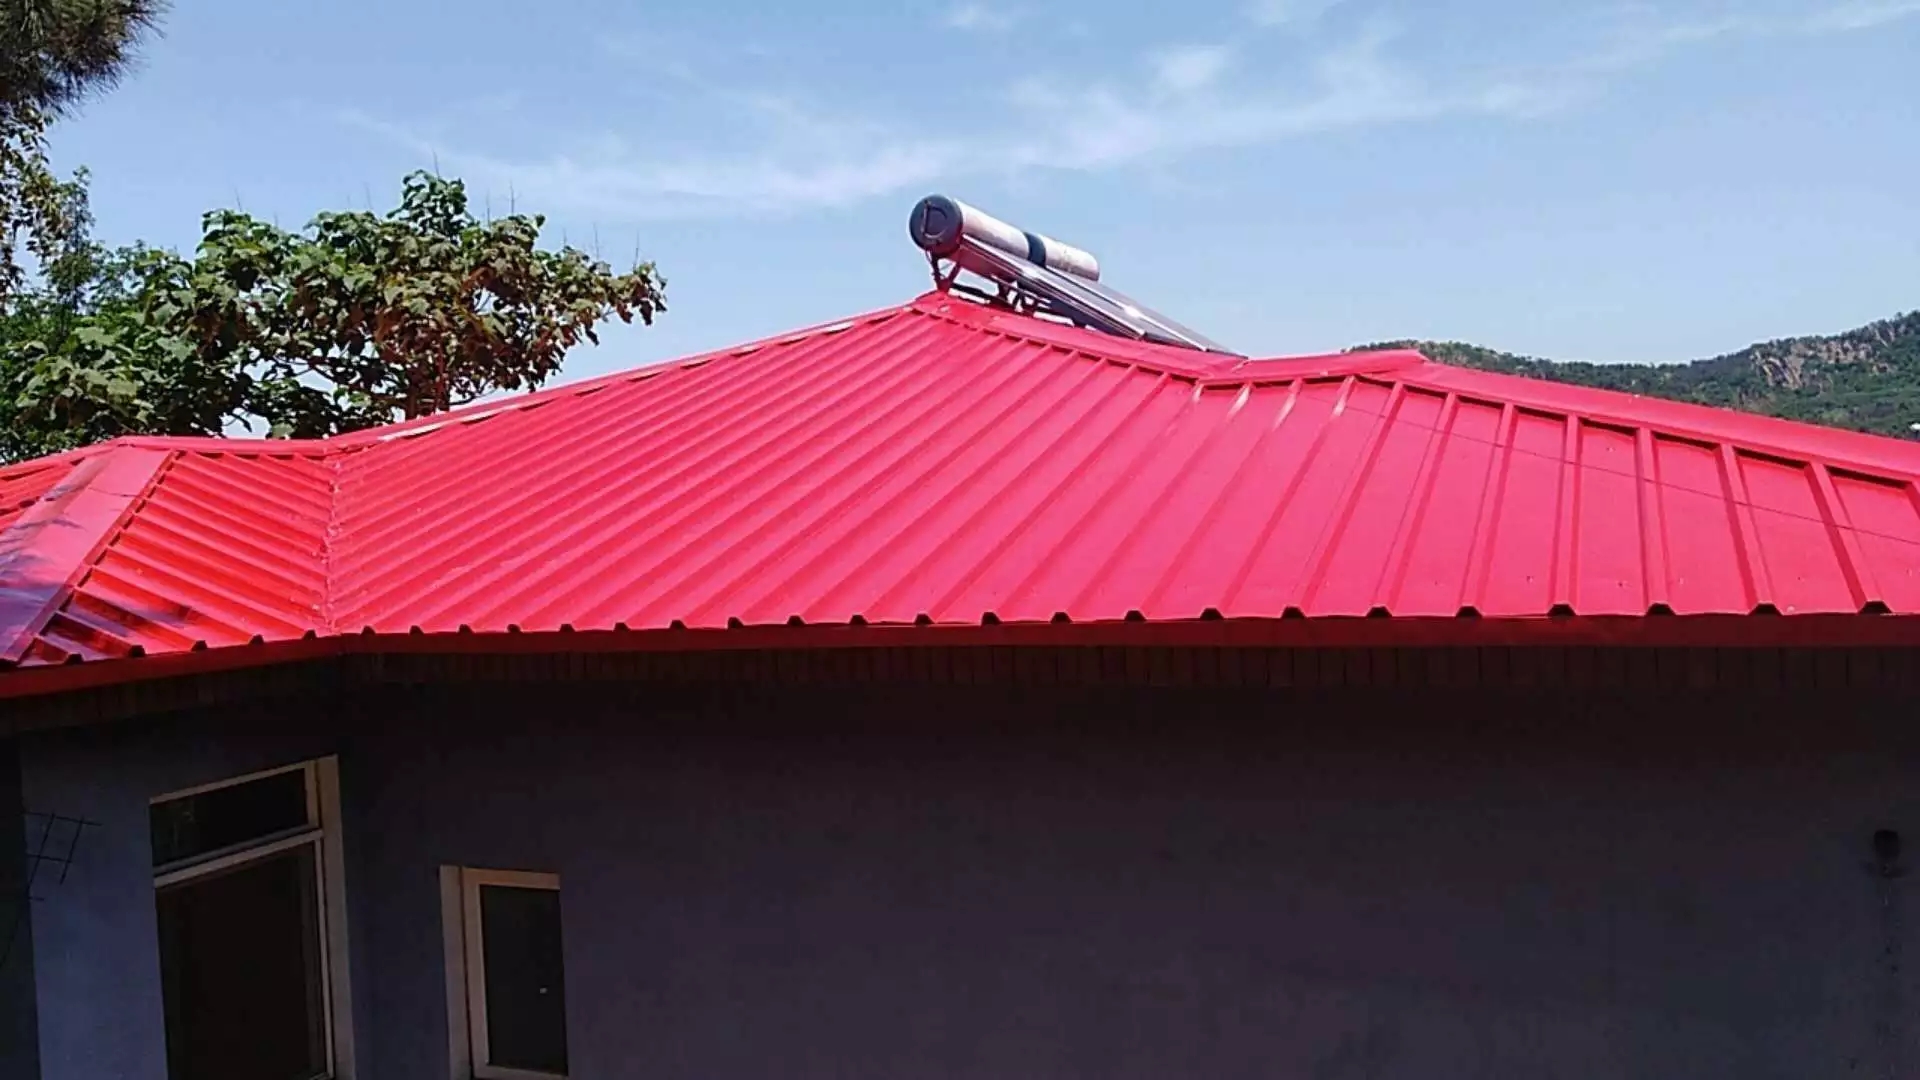 0.5mm Pre-painted Galvanized Steel Roofing Sheet in Red Color for Building Roof Cover